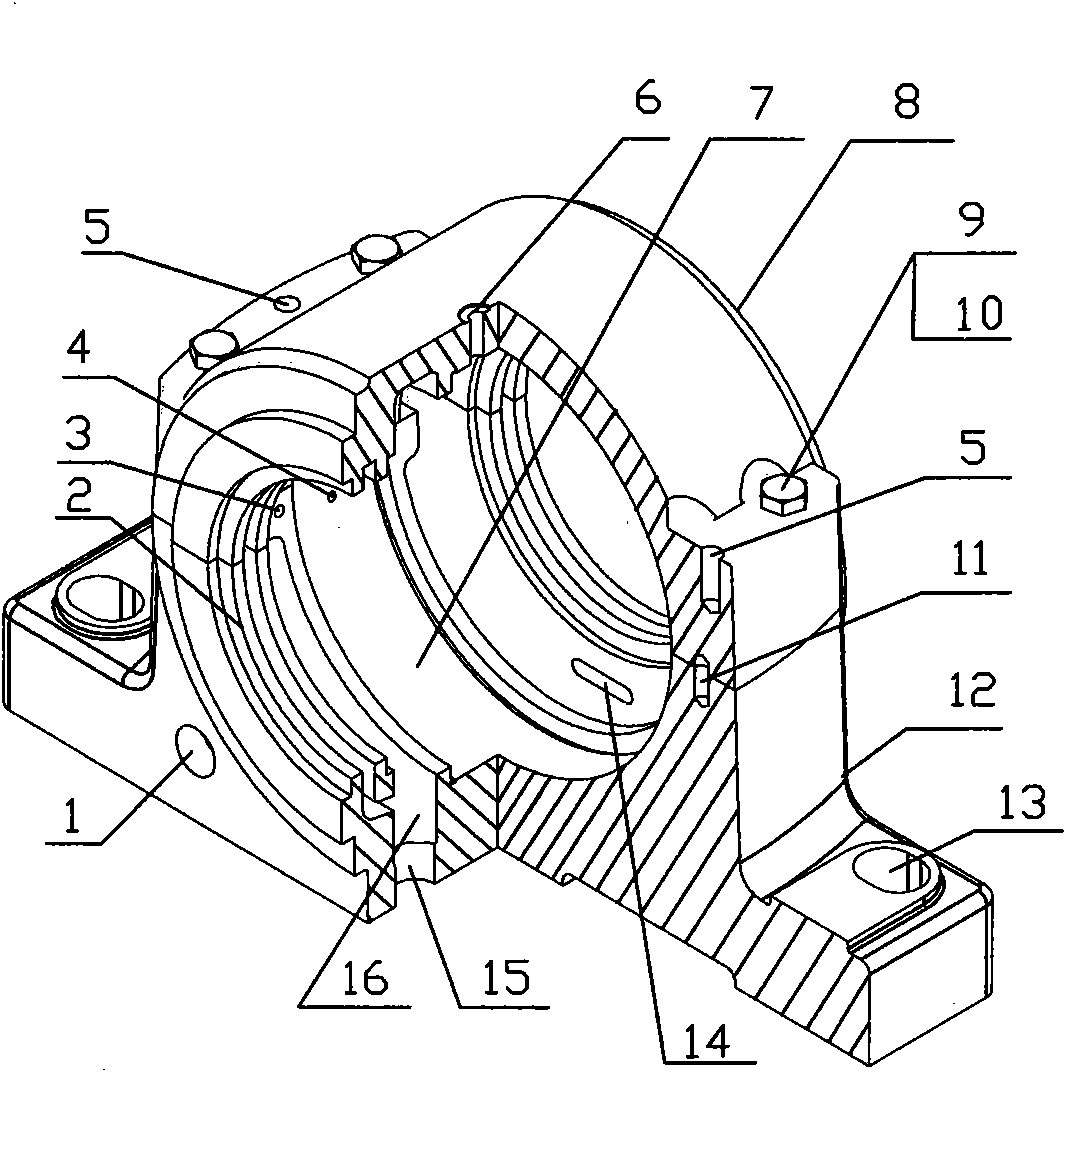 Bearing seat with oil return groove